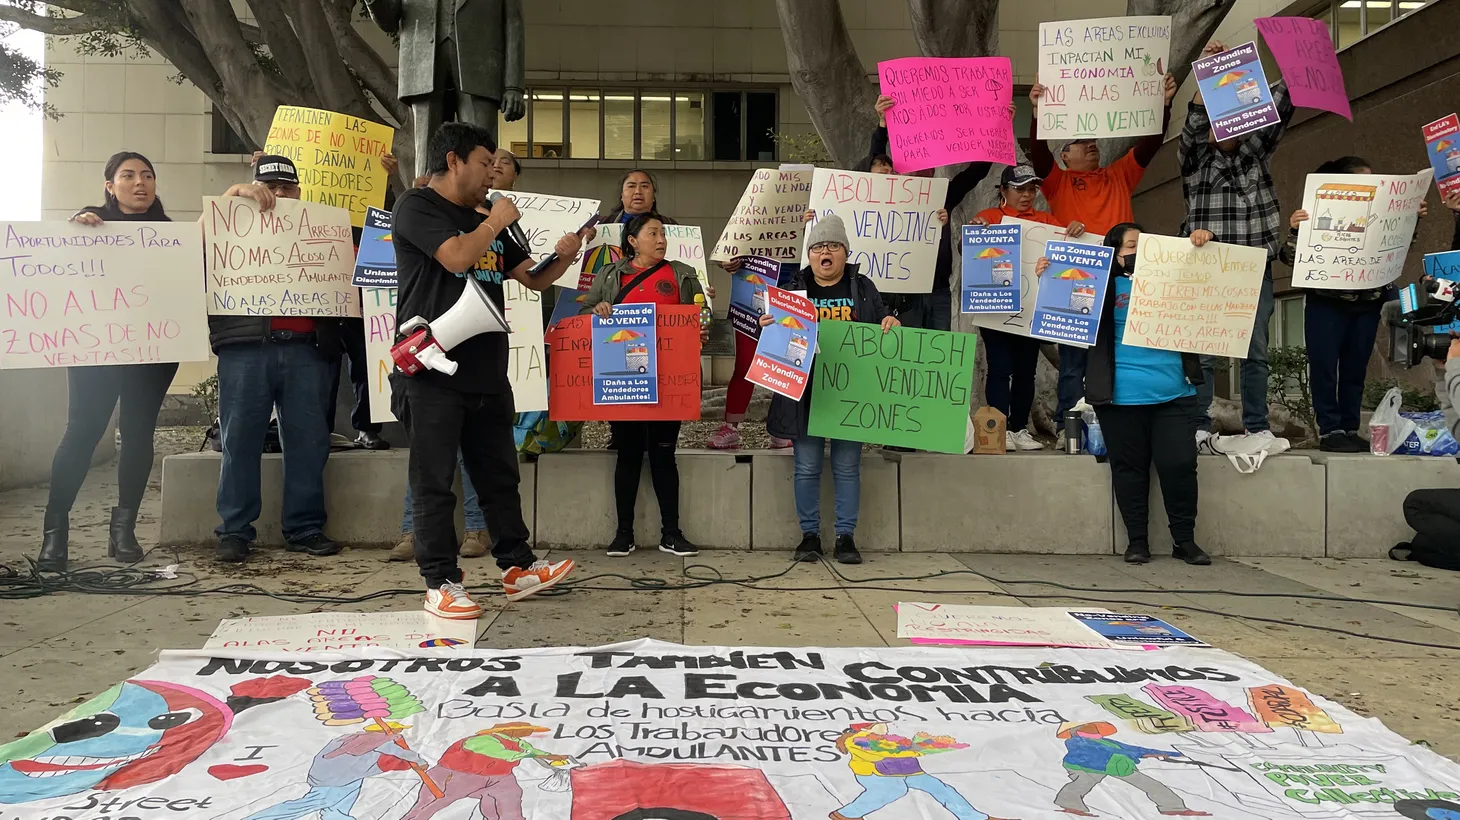 Sidewalk vendors rally in front of the Stanley Mosk Courthouse in Downtown Los Angeles ahead of a hearing on their lawsuit against the City of LA.